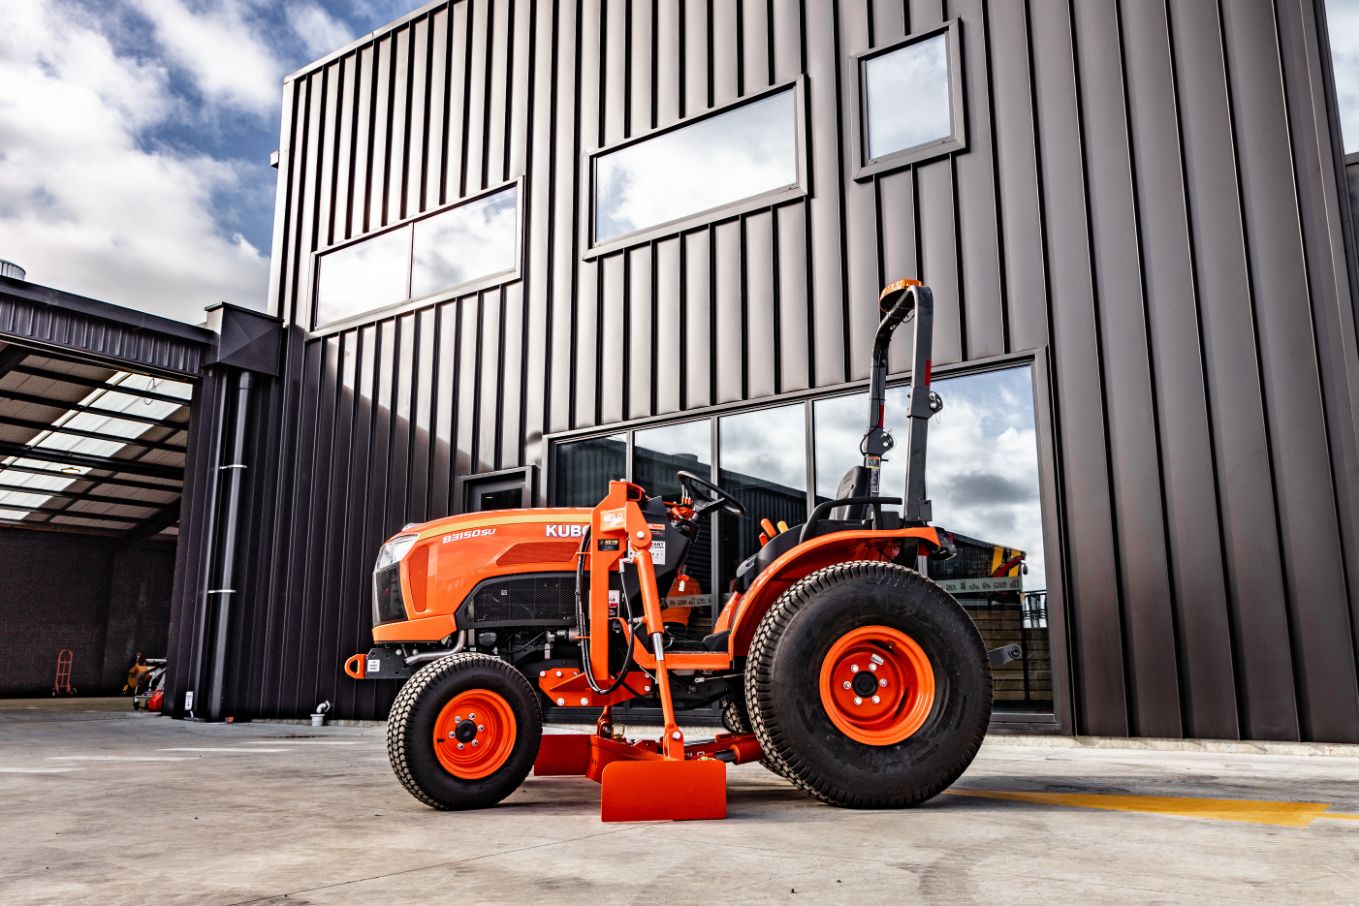 Side view of small orange tractor grader